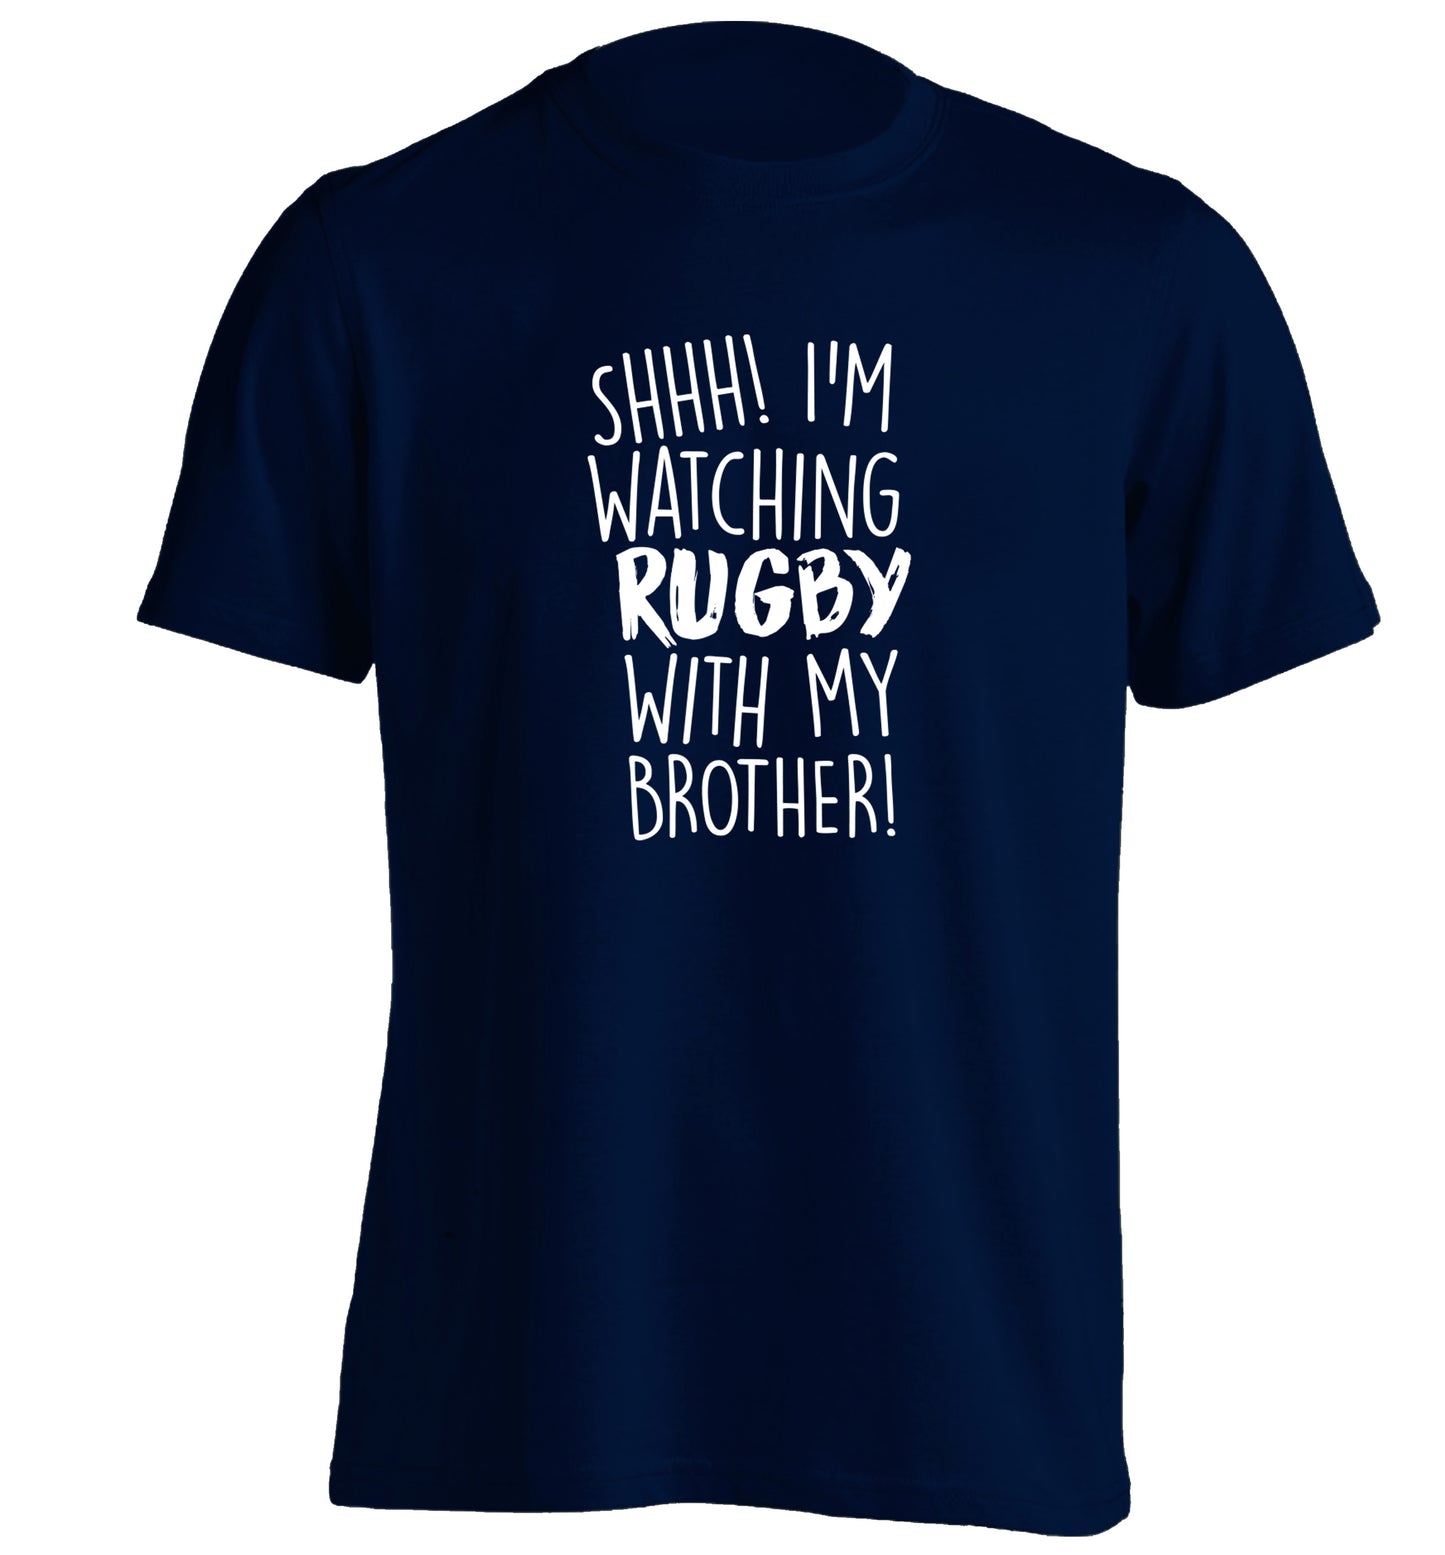 Shh... I'm watching rugby with my brother adults unisex navy Tshirt 2XL